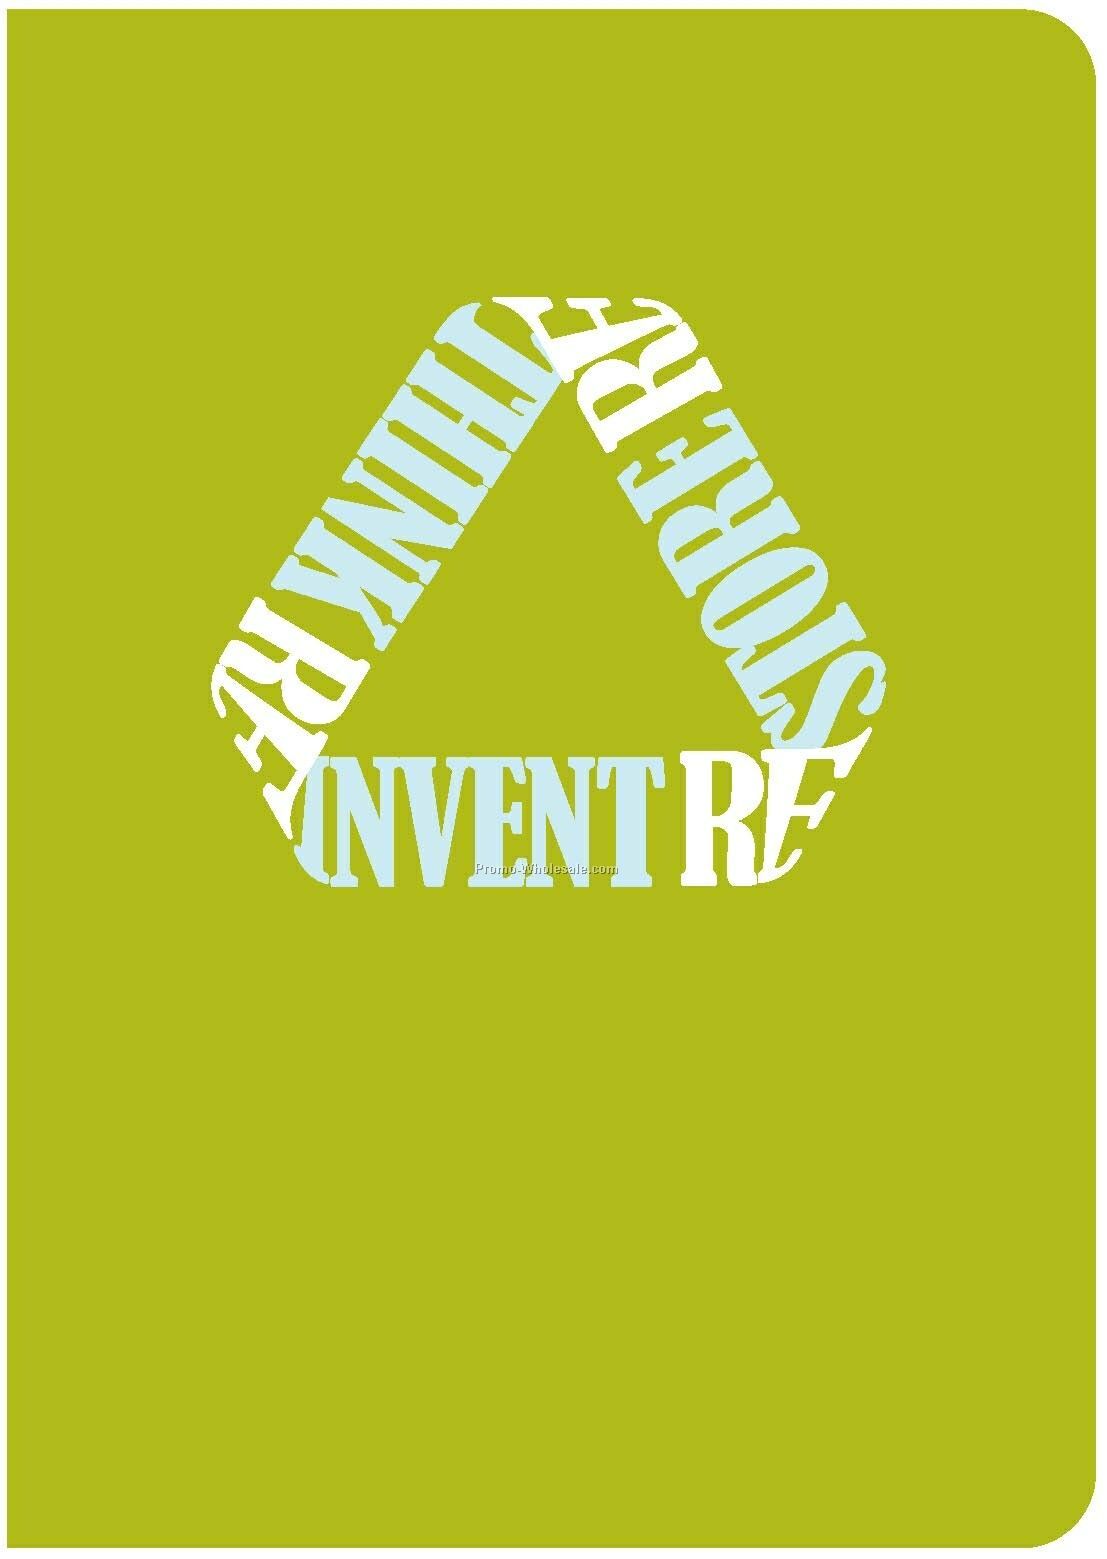 Rethink - Reinvent - Restore - "green Is Good" Thought Books